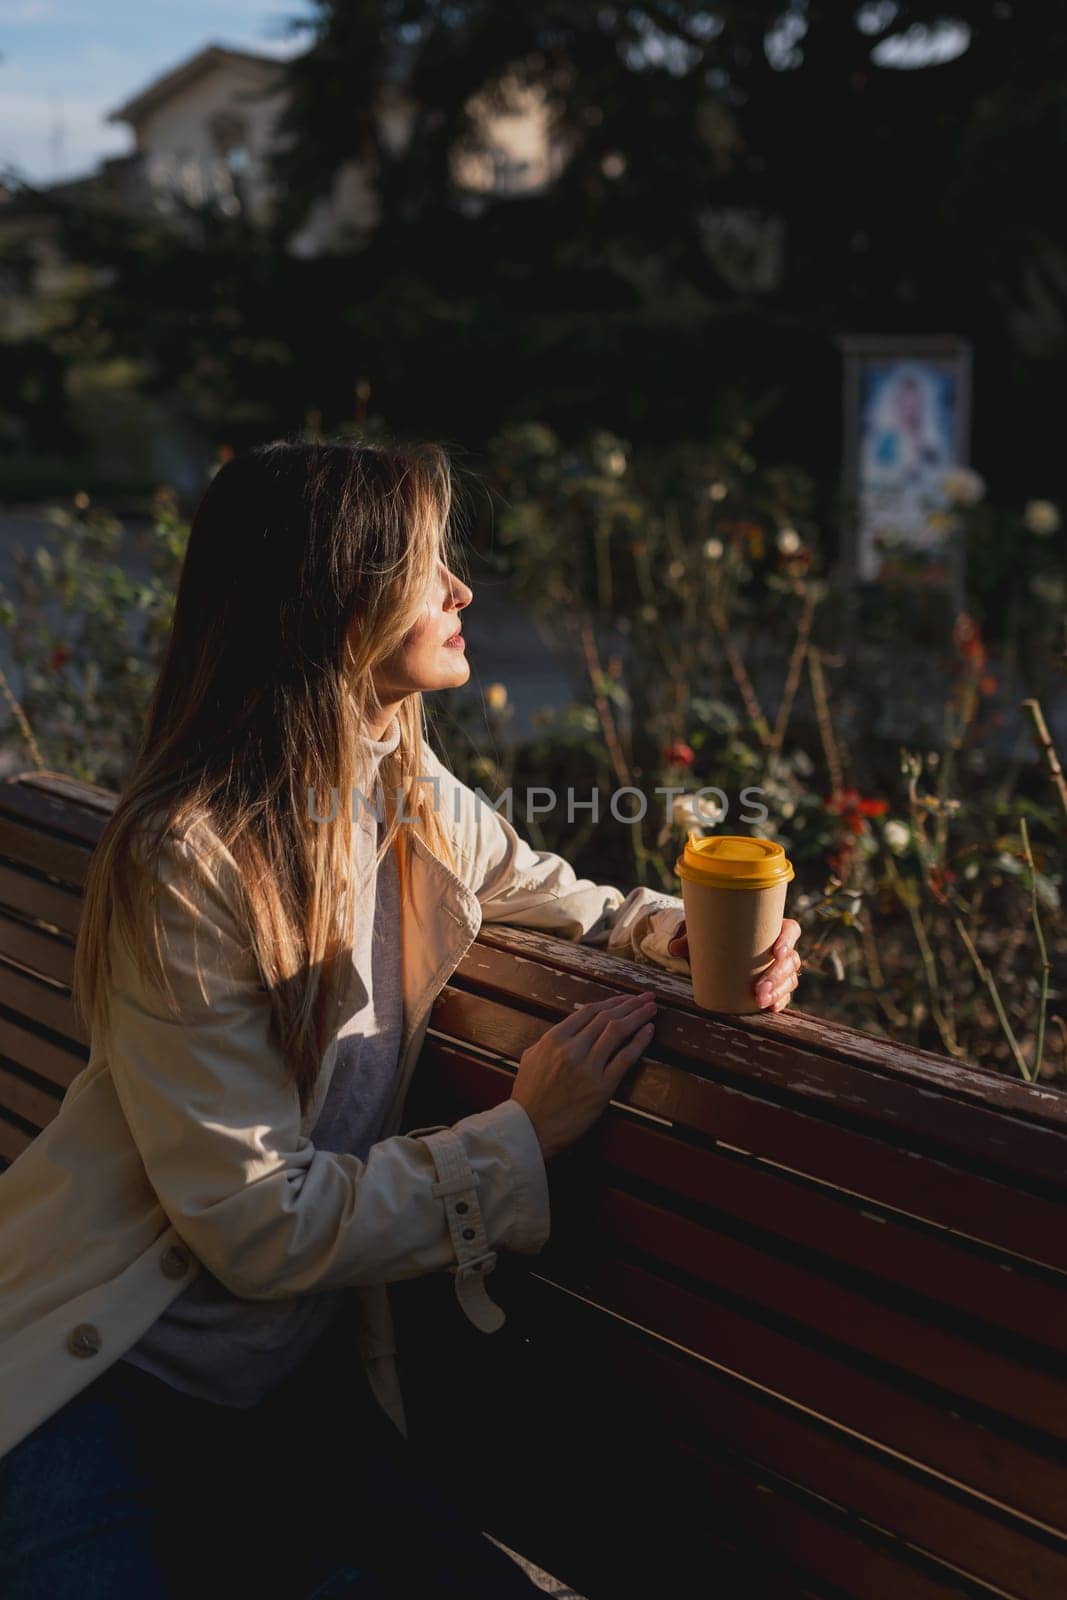 Woman drinks from cup on wooden bench. She is wearing a white shirt enjoying her beverage. The bench is located in a park setting, with trees in the background